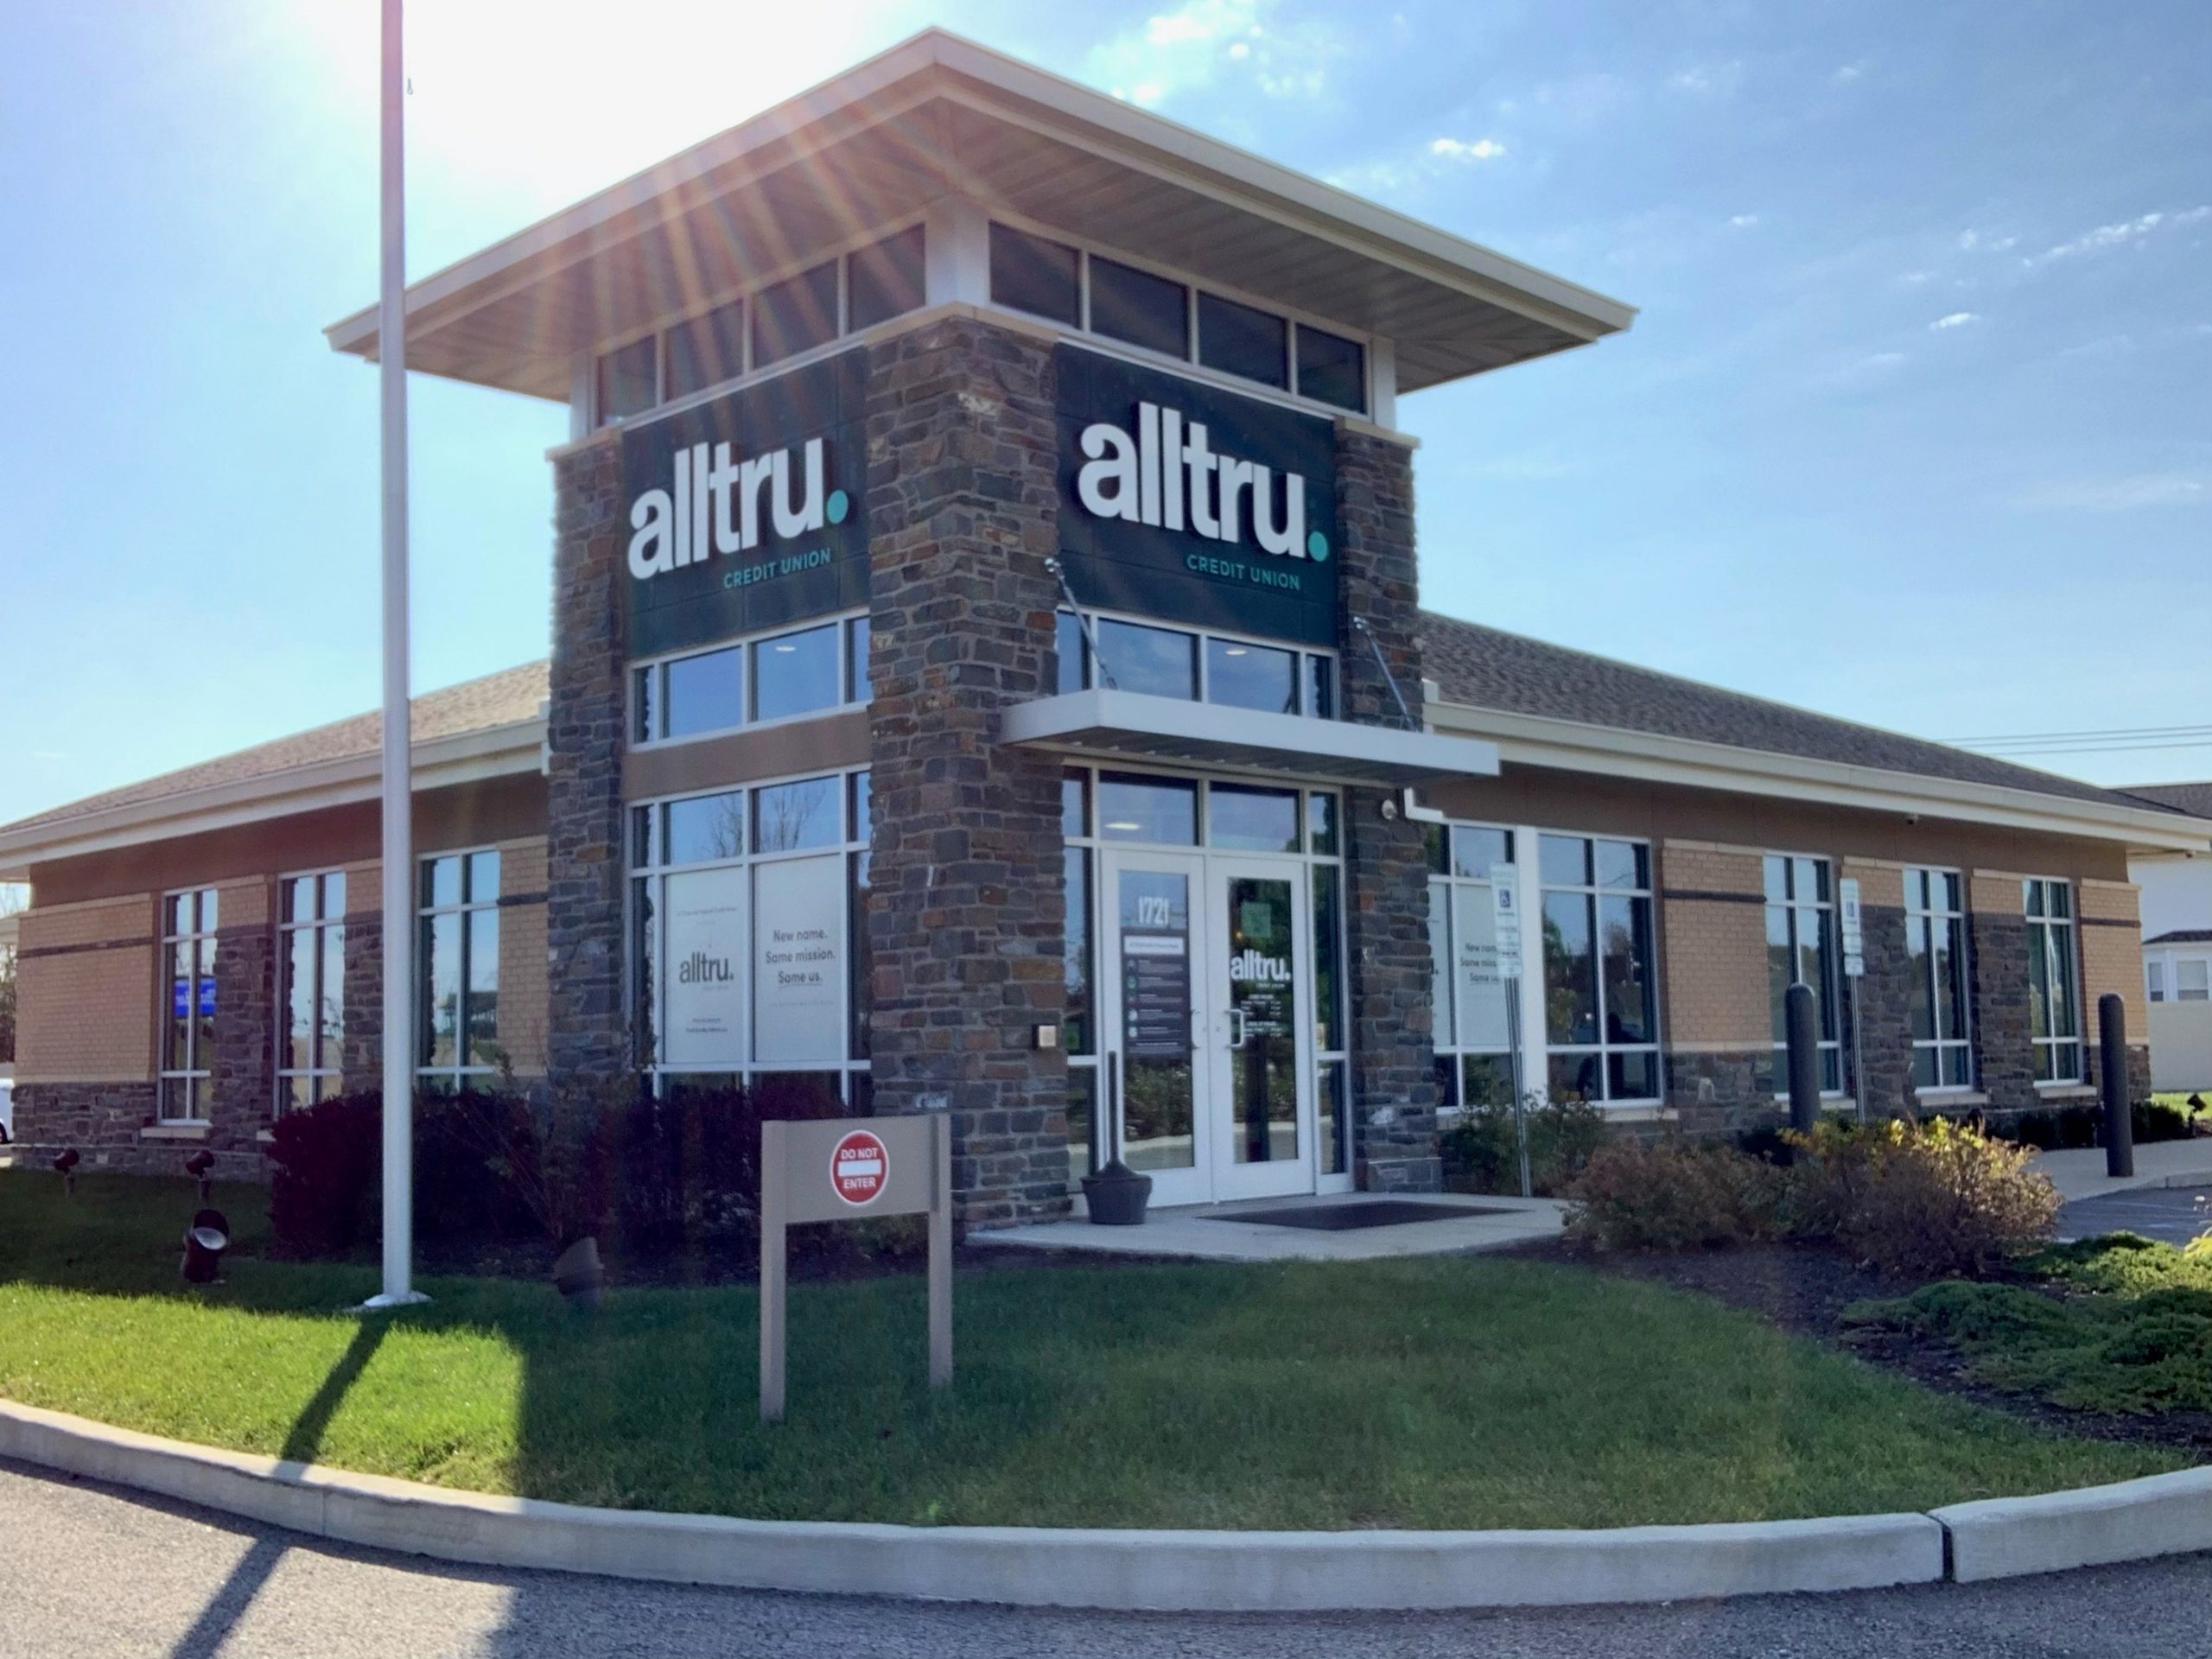 Alltru St. Charles branch with sun shining on the front of it